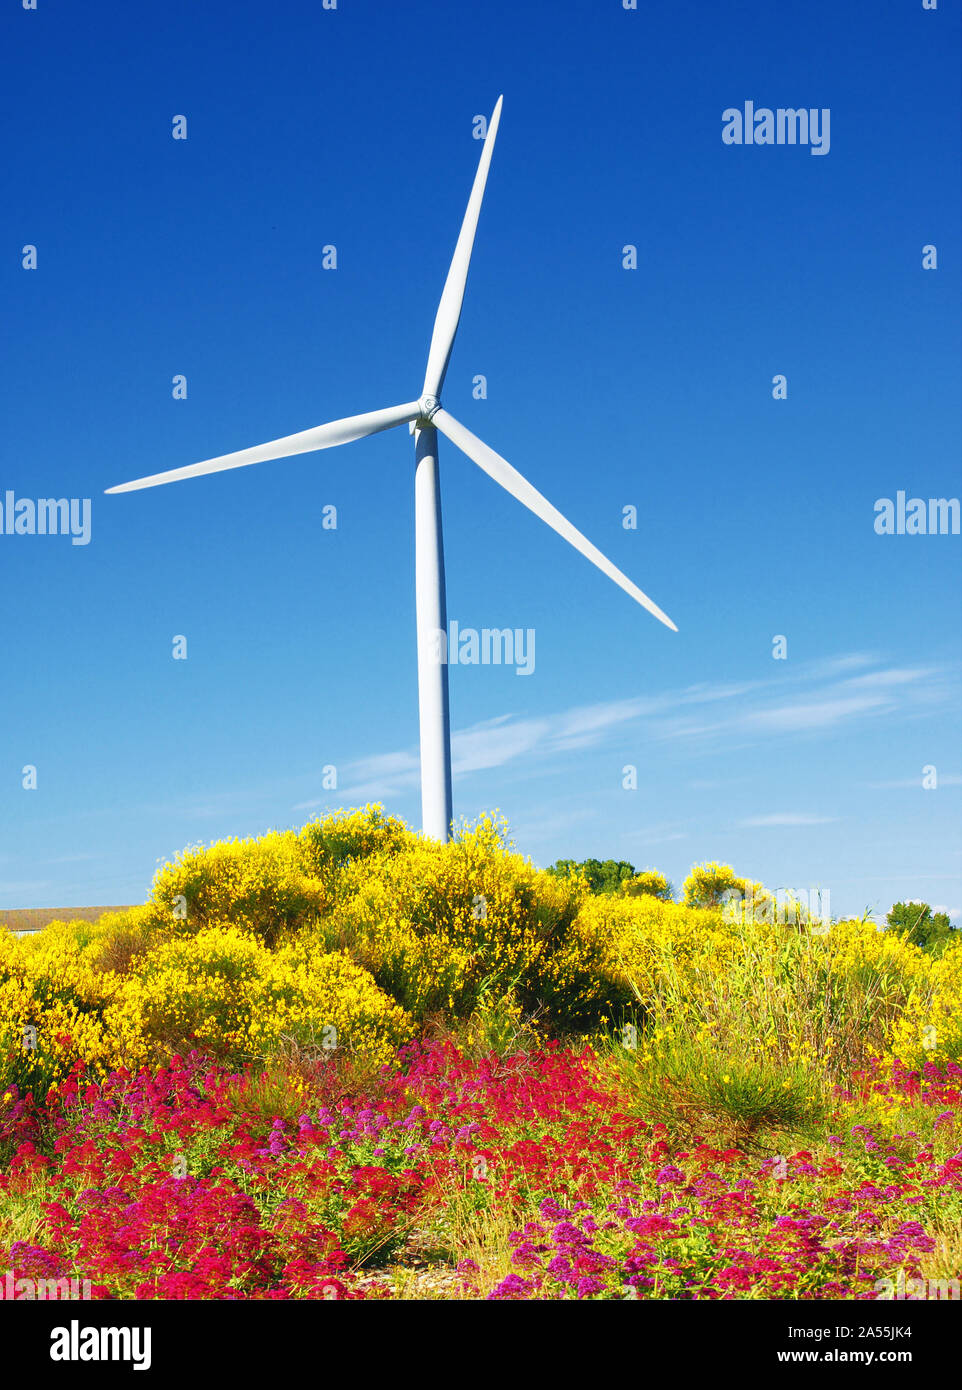 Clean energy production with wind turbines on blue sky background Stock Photo